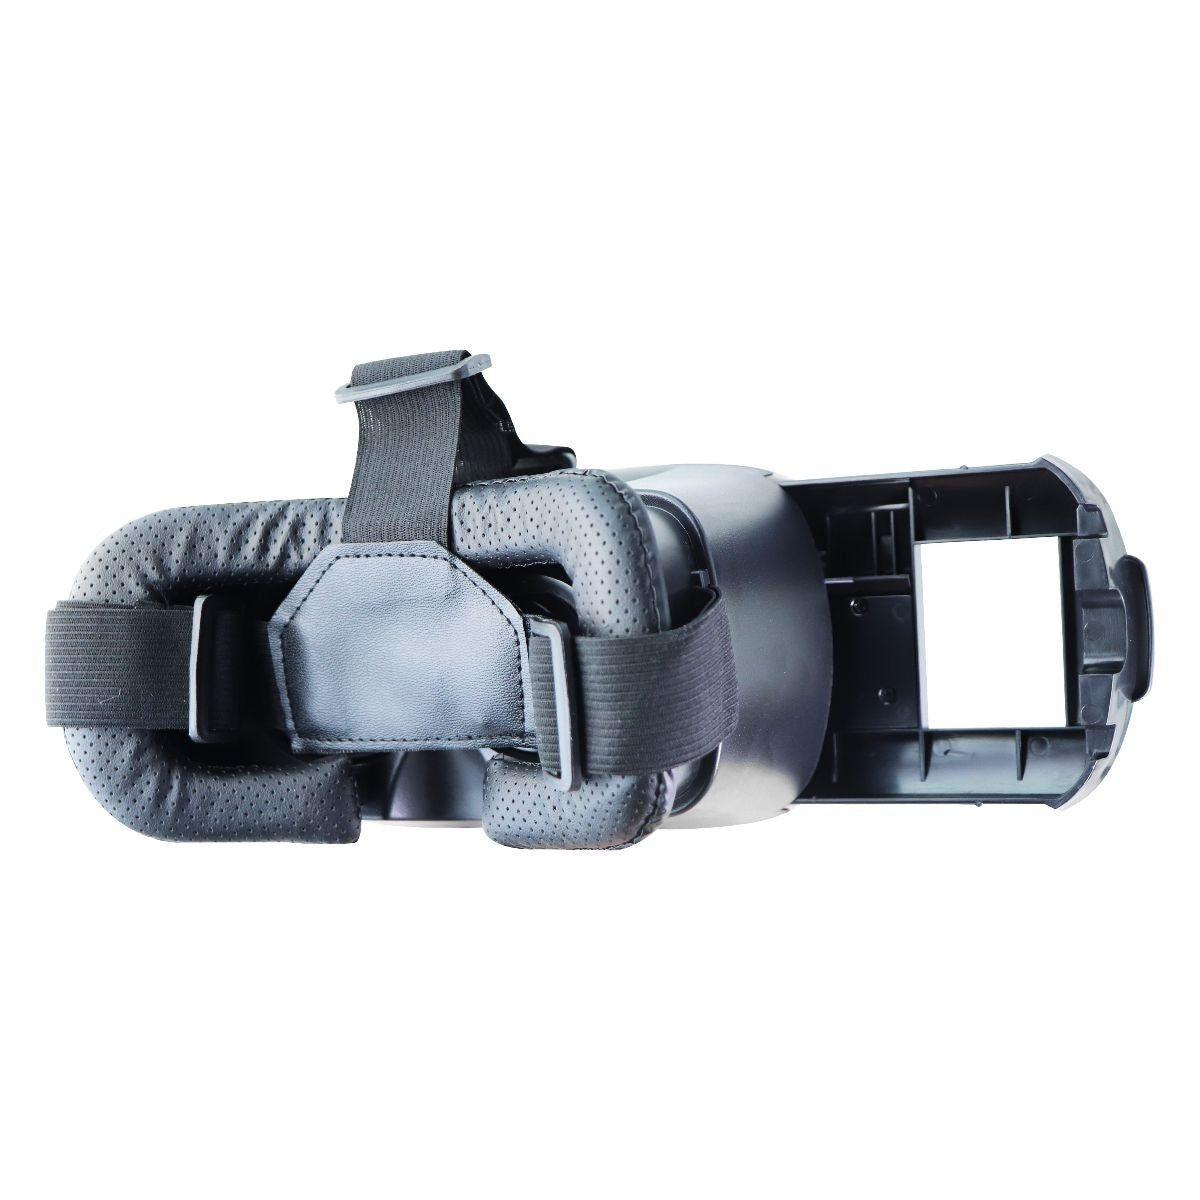 Xtreme Cables VR Vue II Virtual Reality Viewer for iPhone and Android Devices